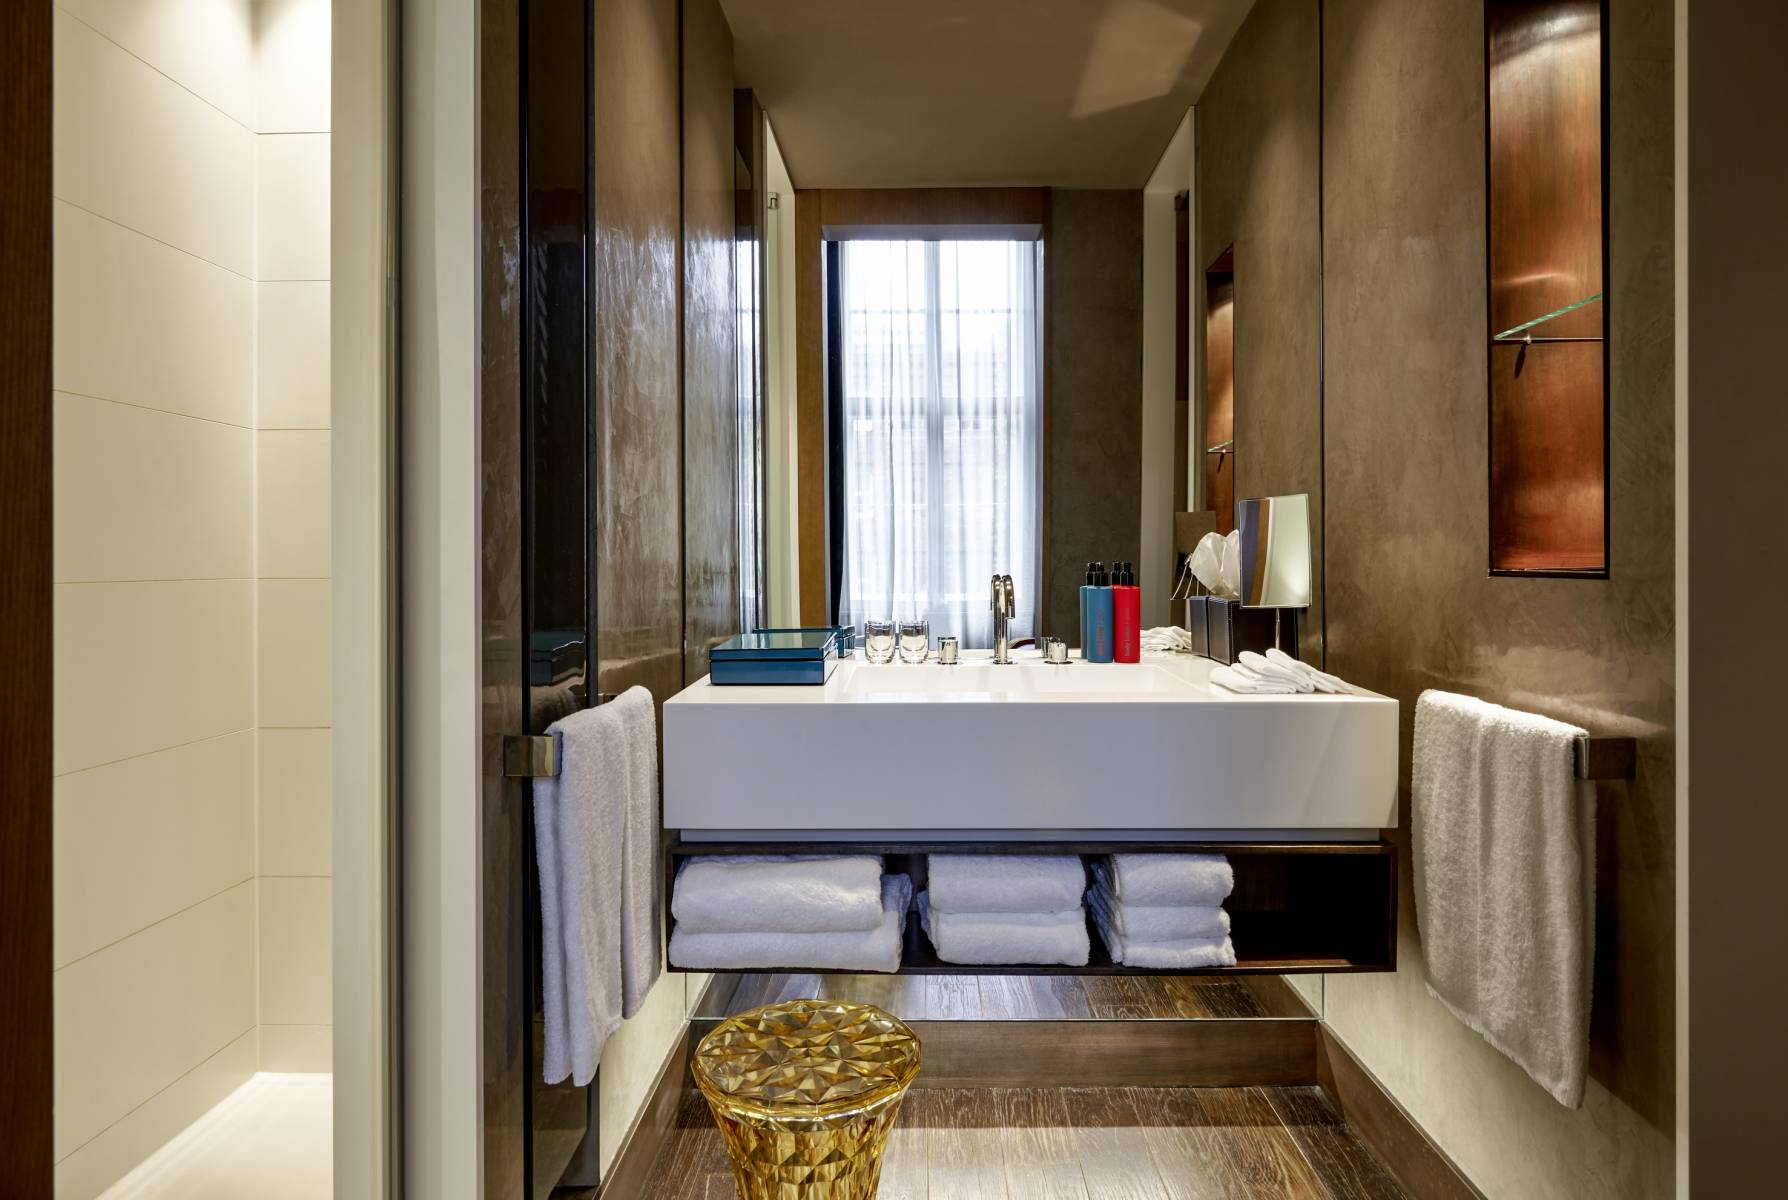 Stue Suites | 70 m² city residence, freestanding bathtub, view of ...